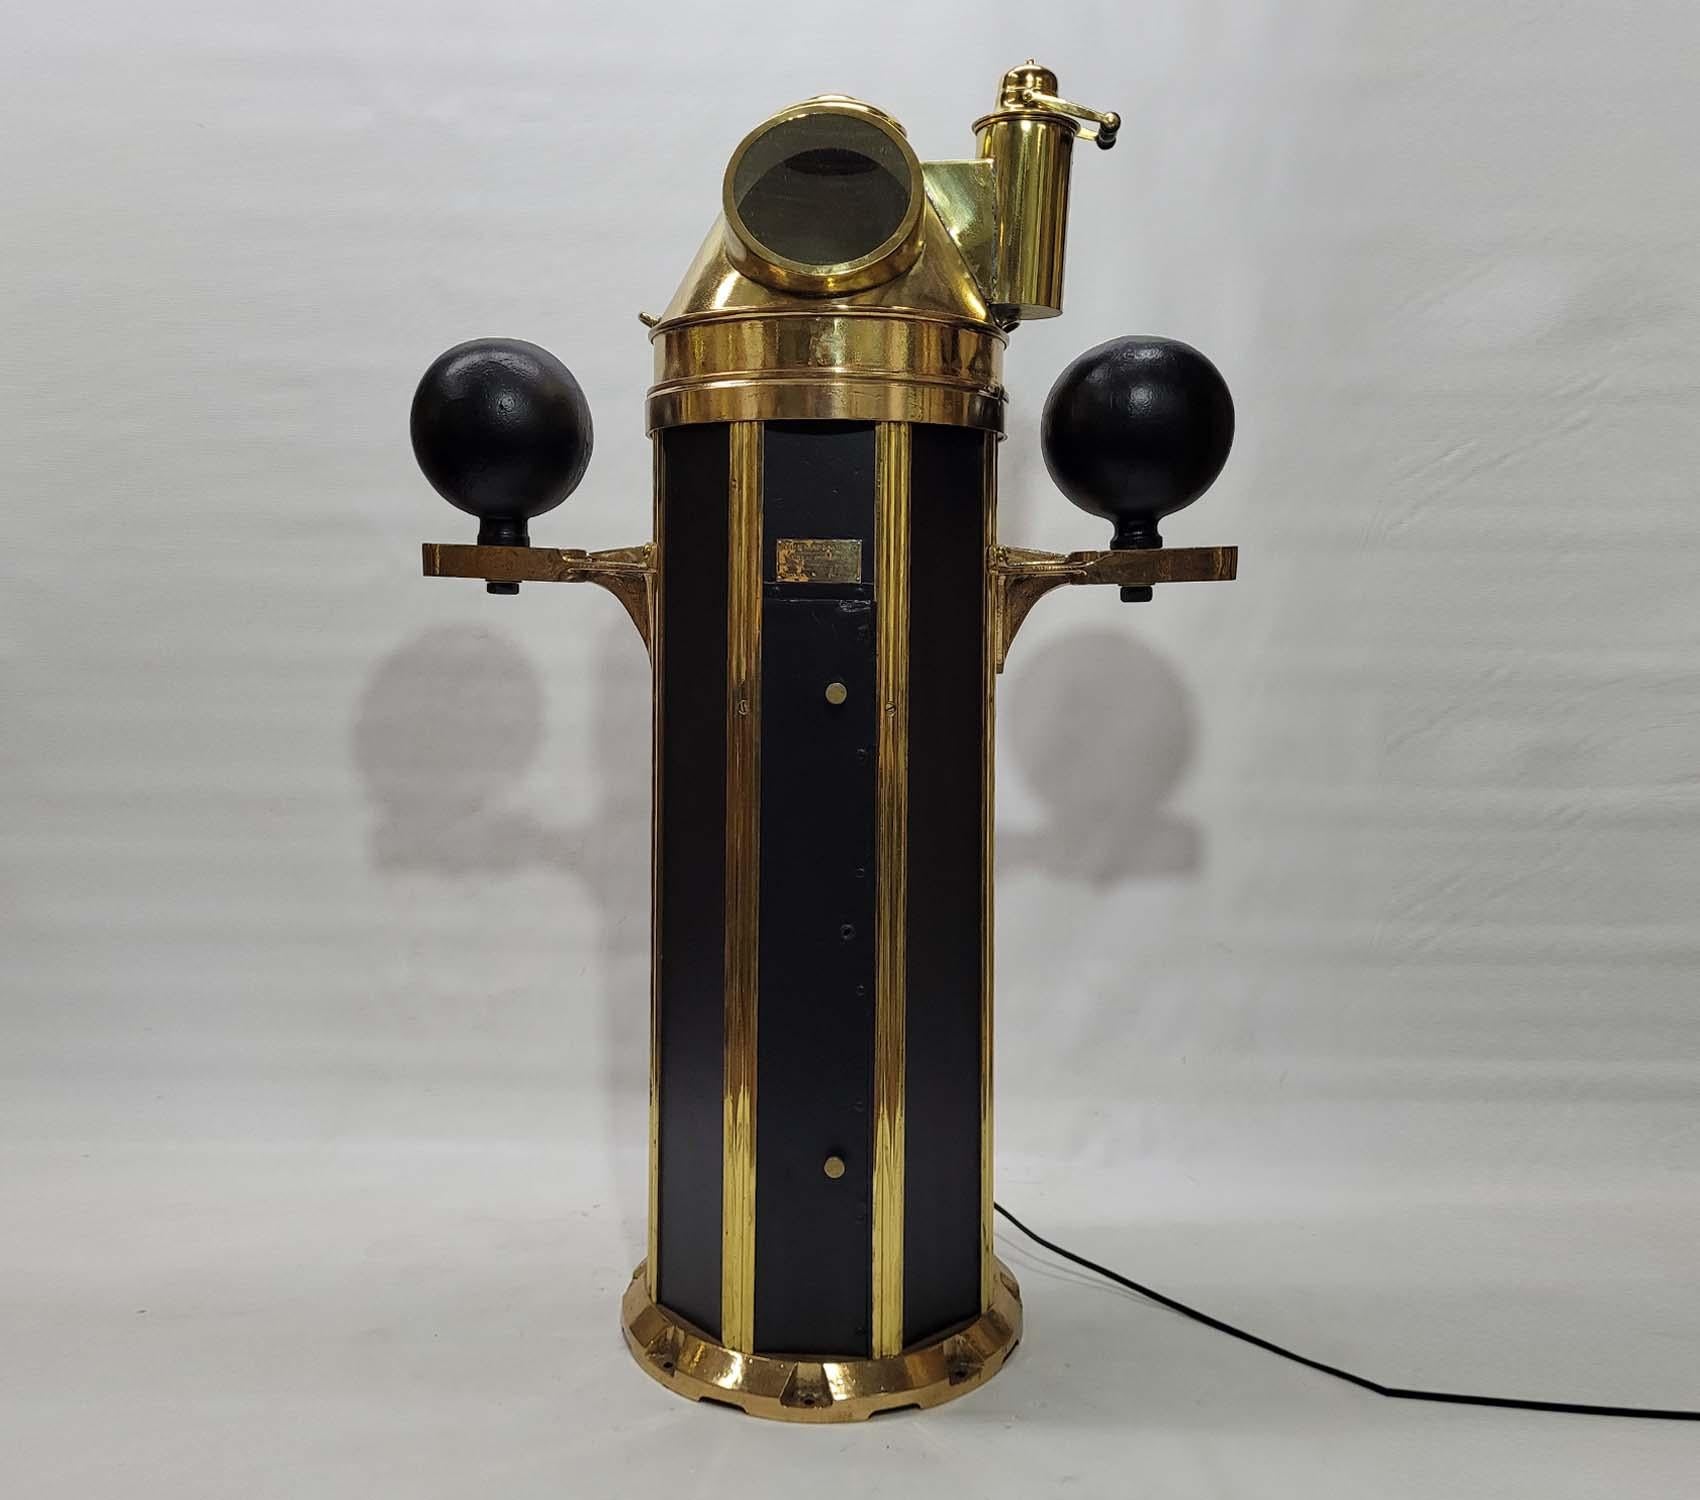 Unique style marine binnacle by American maker John Hand and Son of Philadelphia. With polished and lacquered brass hood, compass, base trim, and rarely found wide brass strips on base. The compensating ball brackets are also polished and lacquered